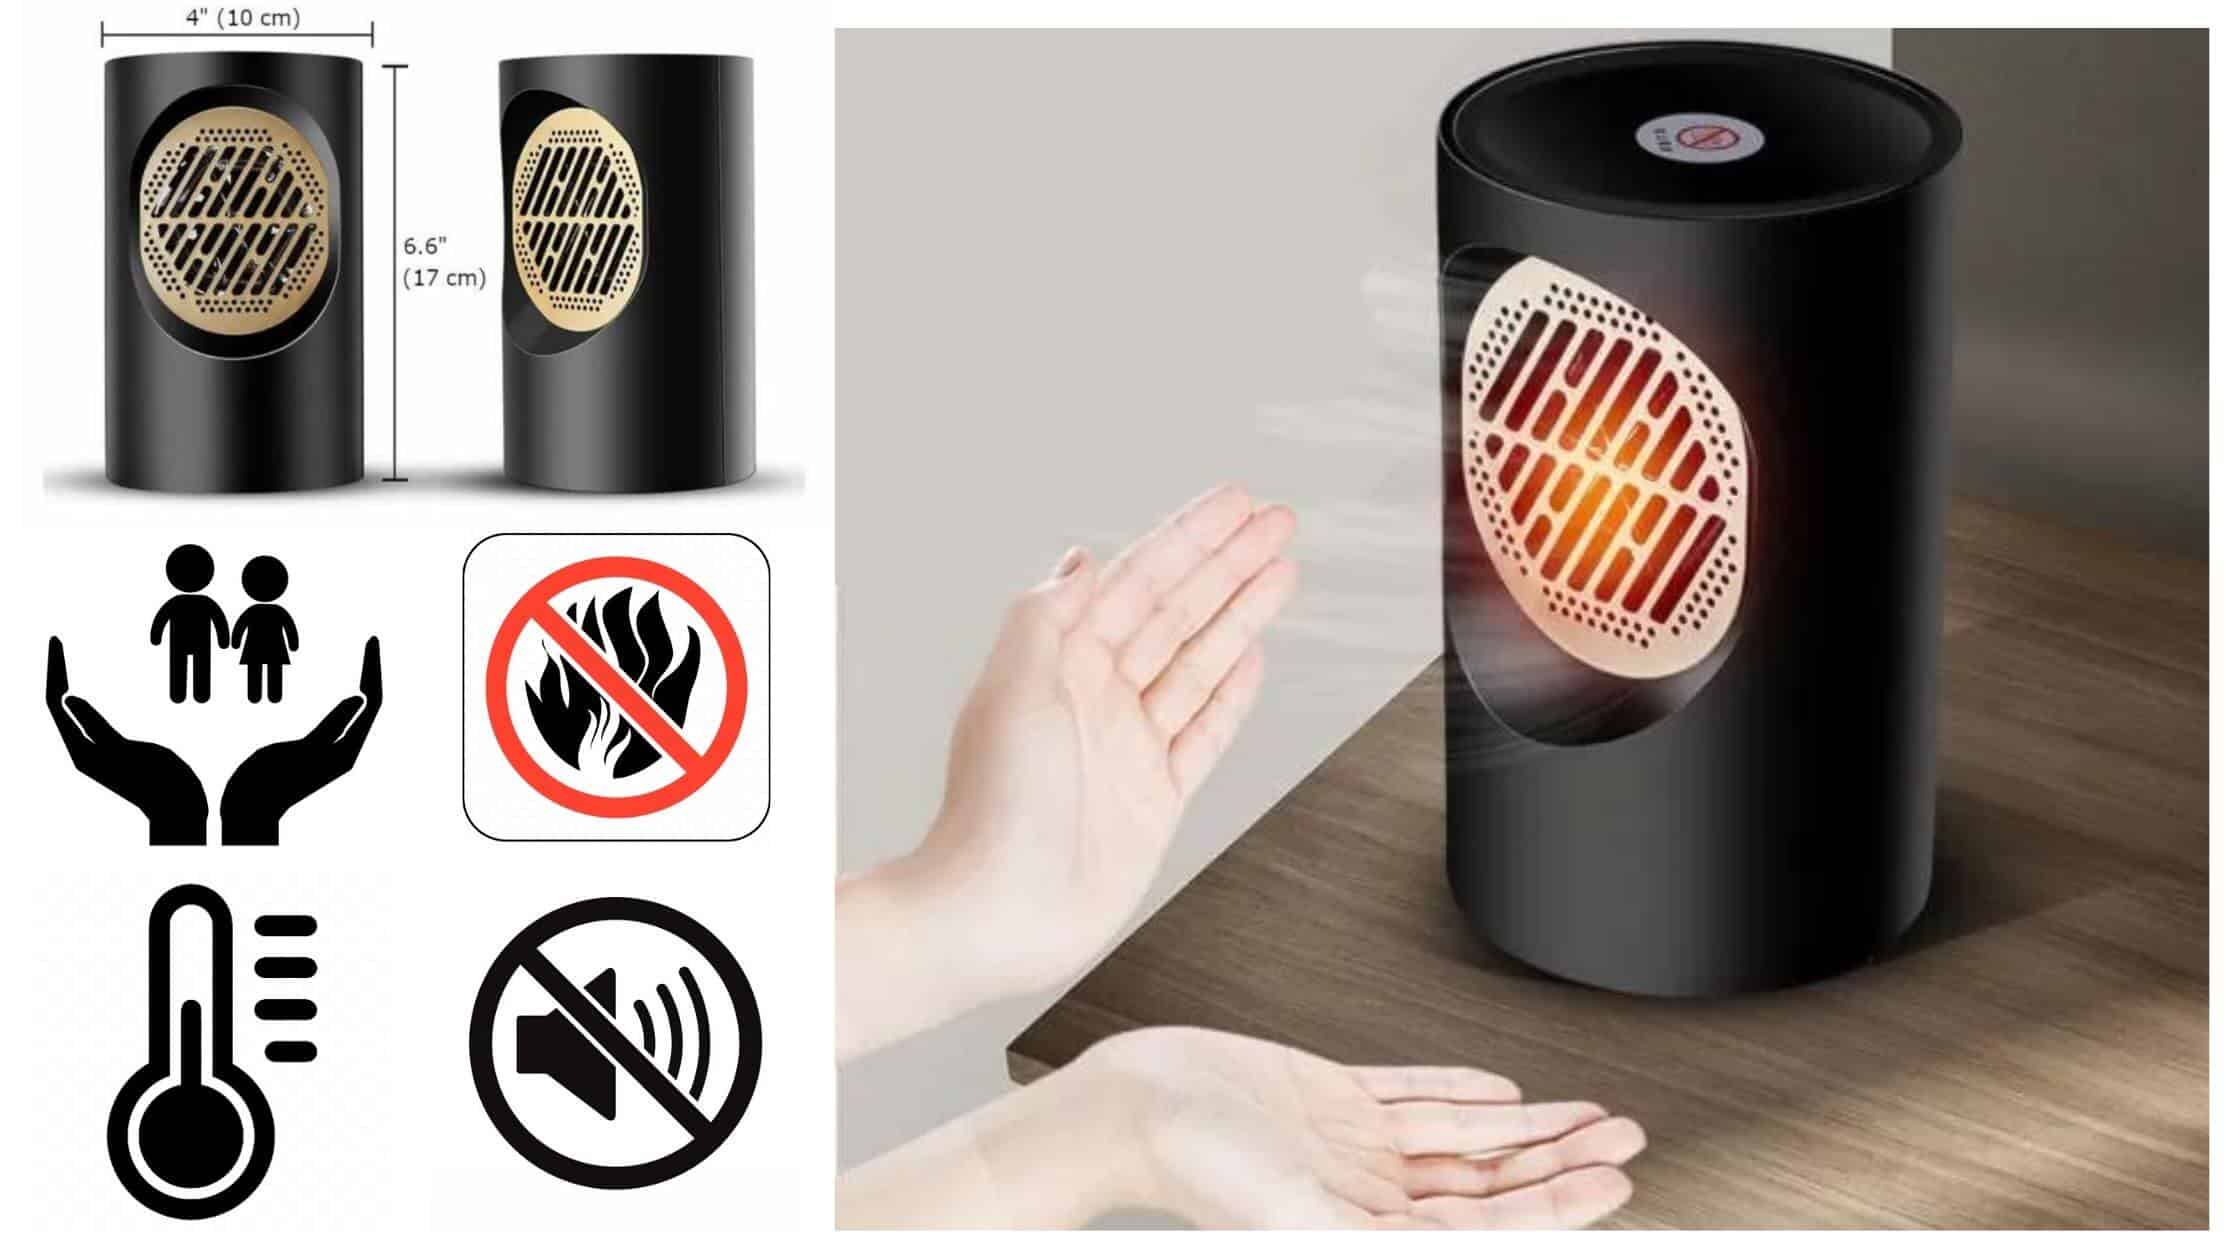 Ultra Heater Features